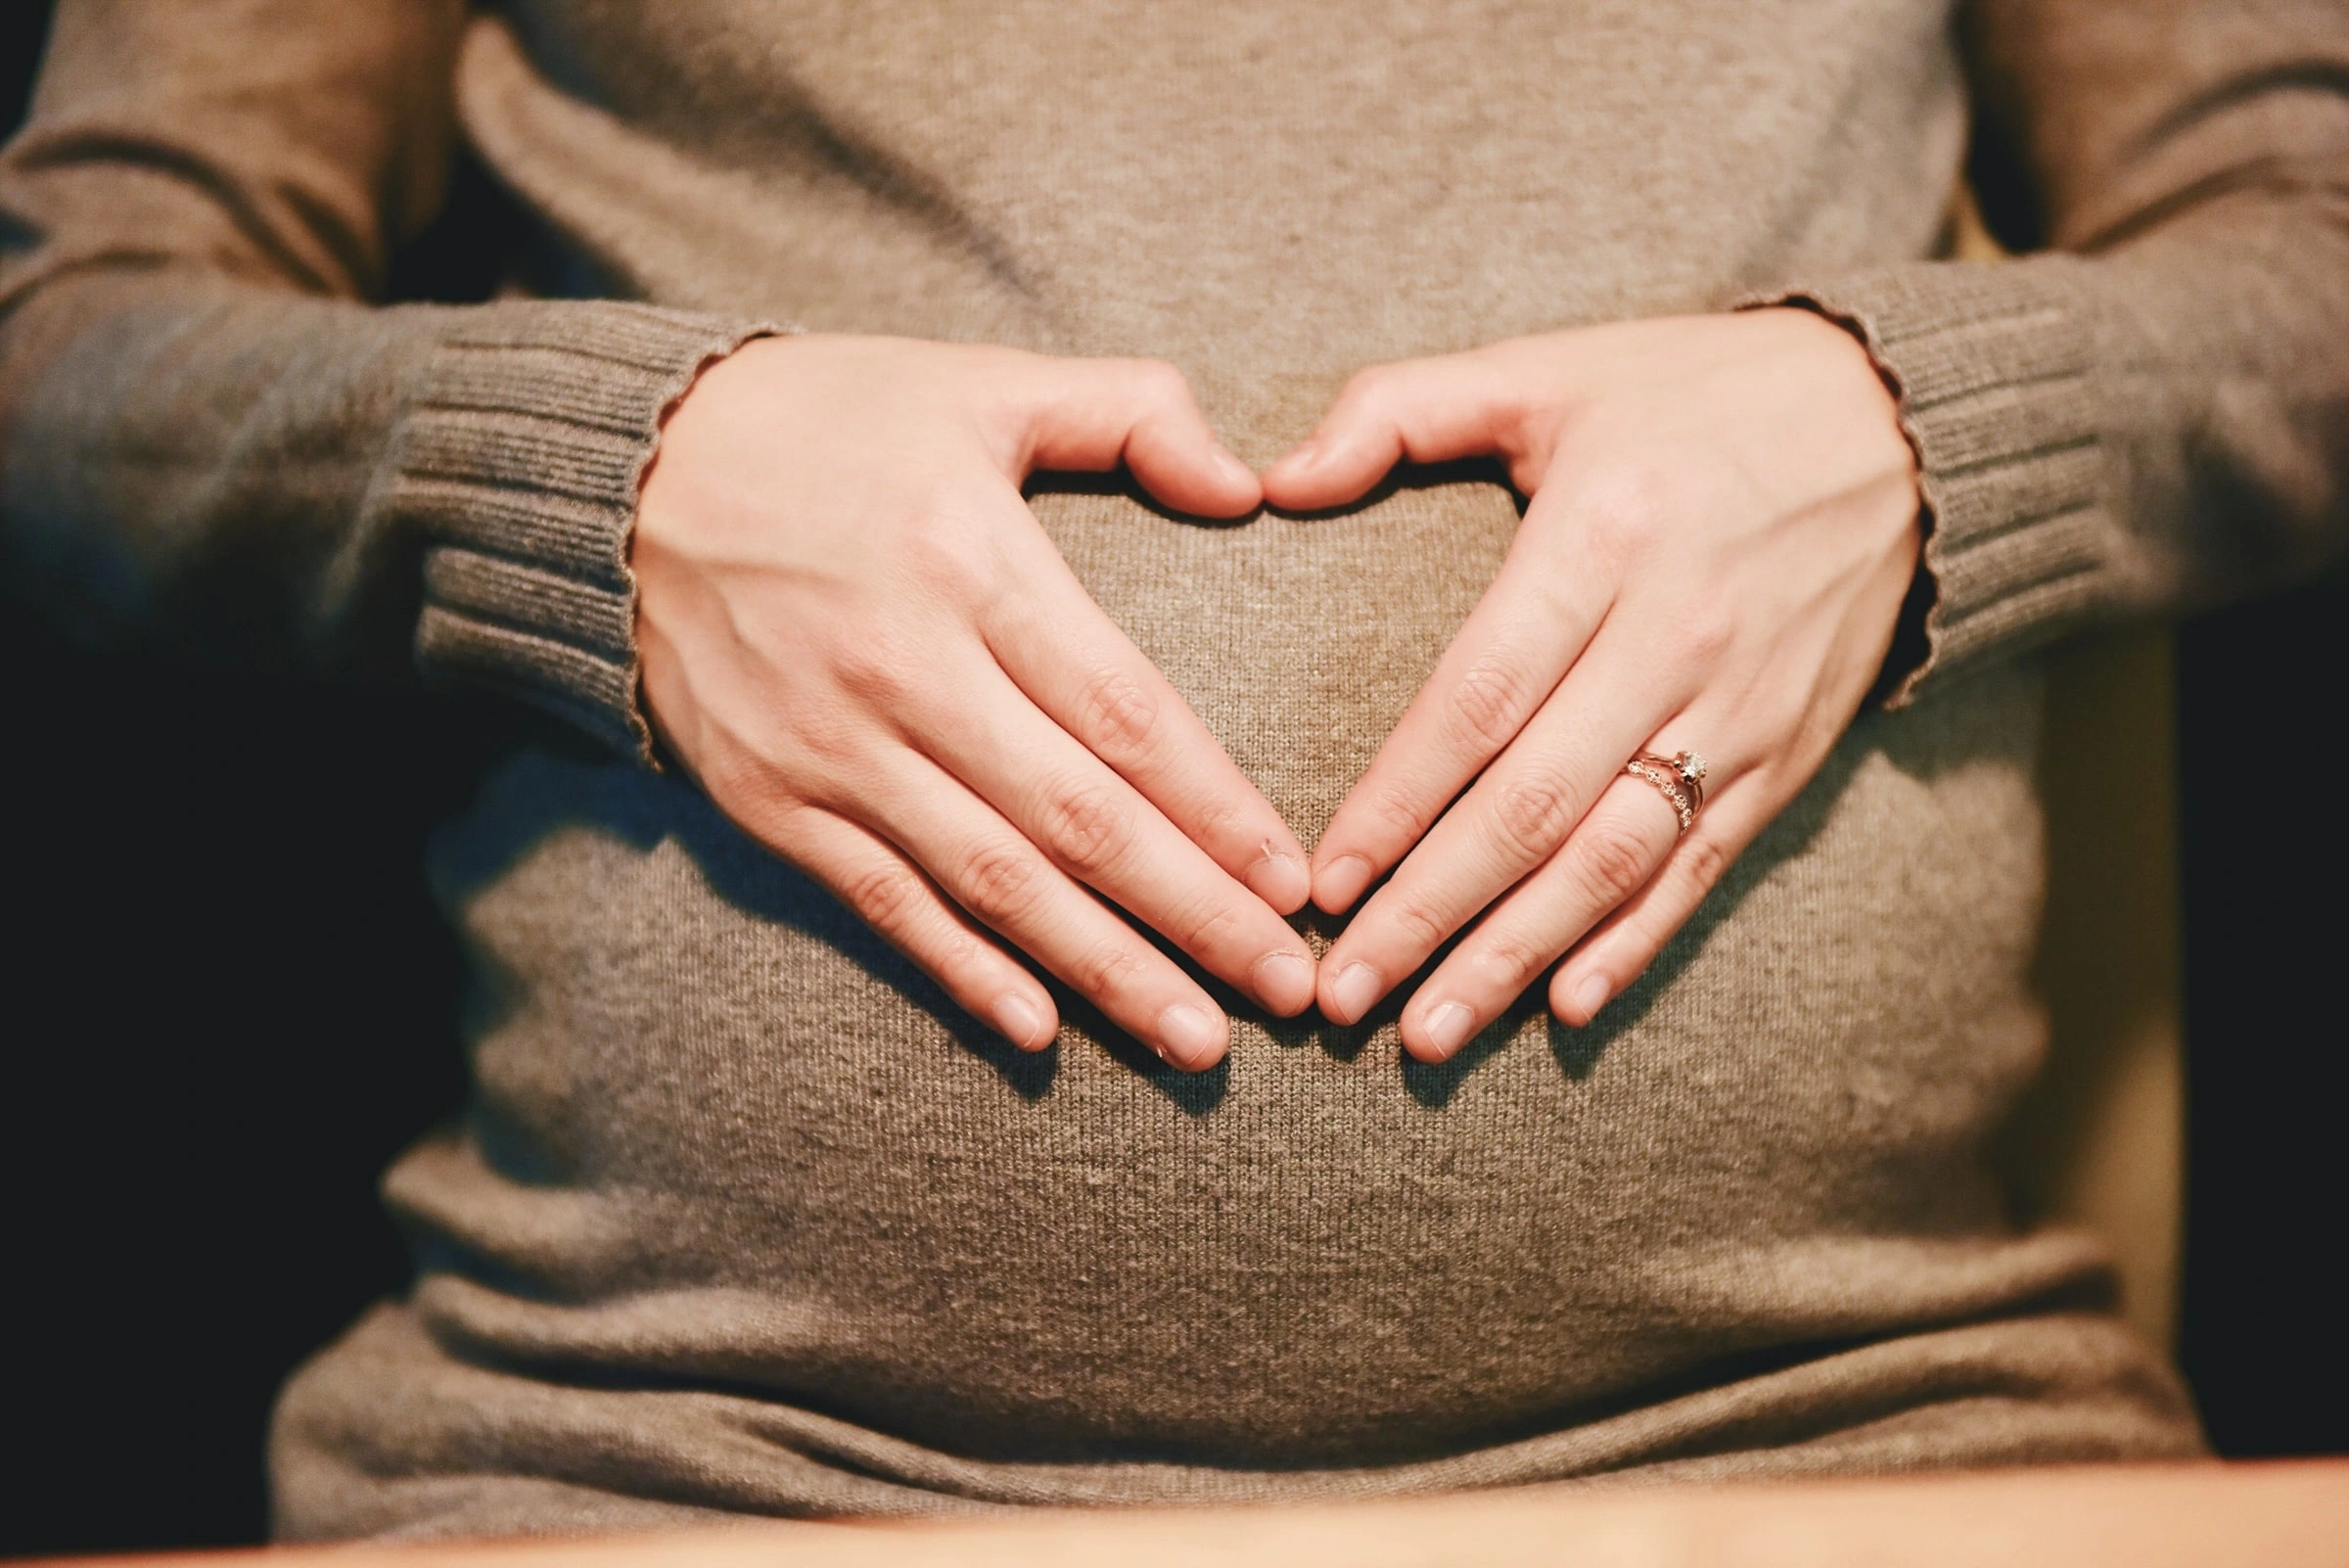 Four Arms Show Heart on Stomach of Pregnant Woman Stock Photo